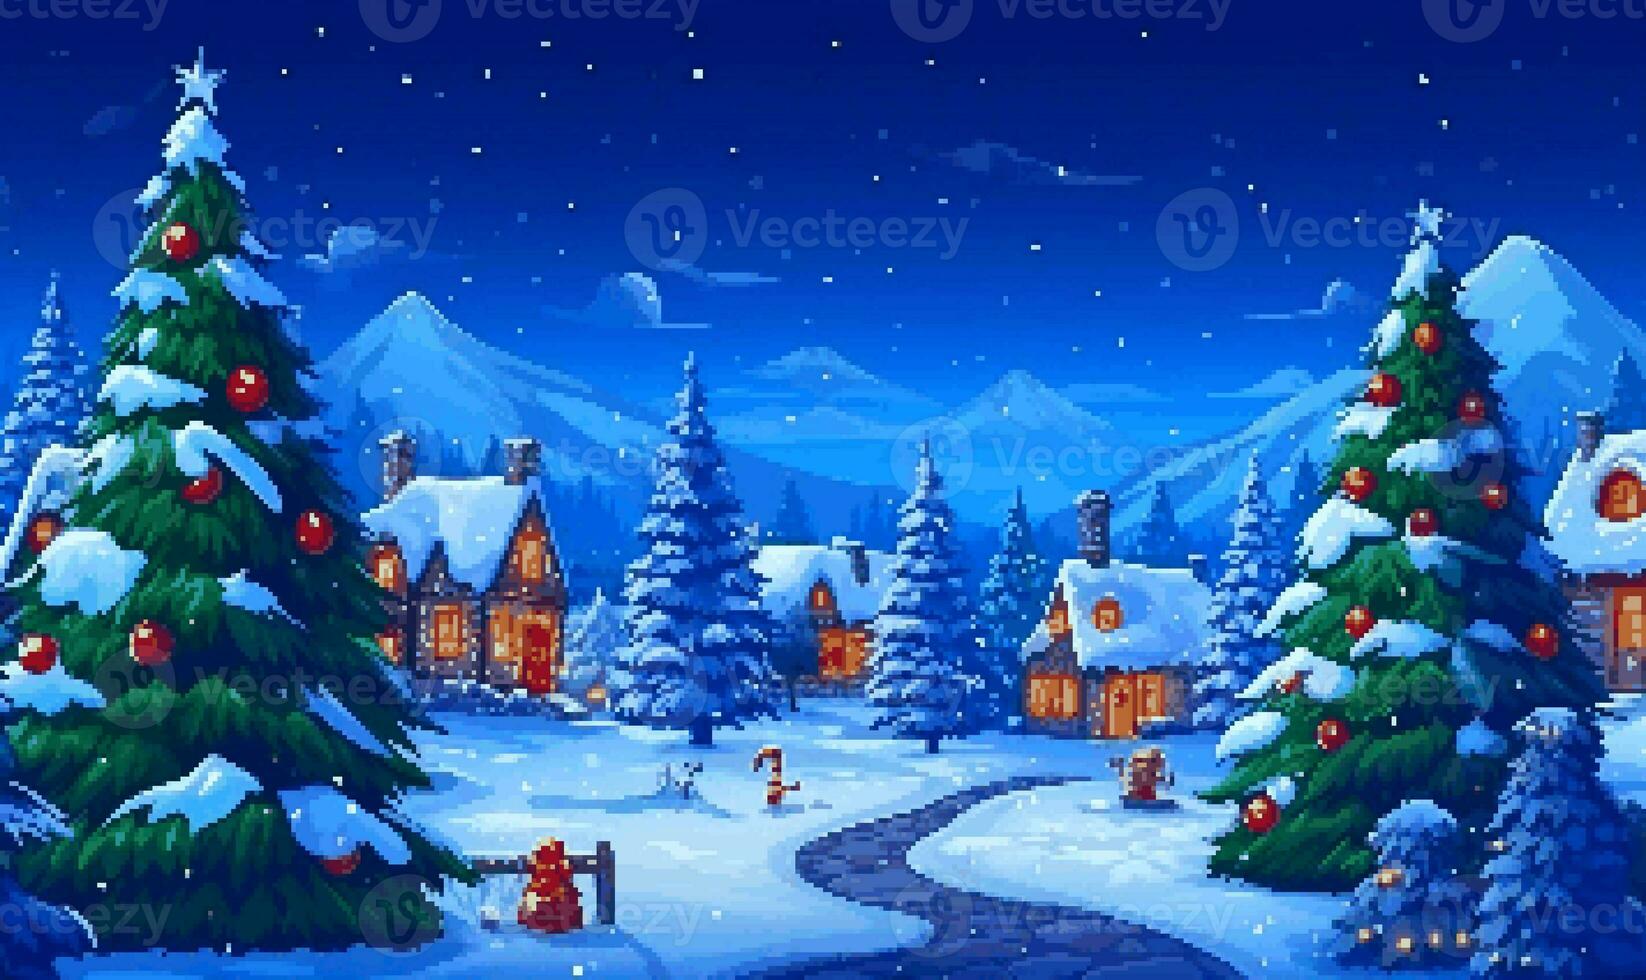 Christmas Festival Backgroud with Decoration Christmas Tree, Gingerbread House, Reindeer, Santa Claus and Ornament Pixel Art Retro RPG Game 8 bits 16 bits 32 bits Style - AI Generated photo